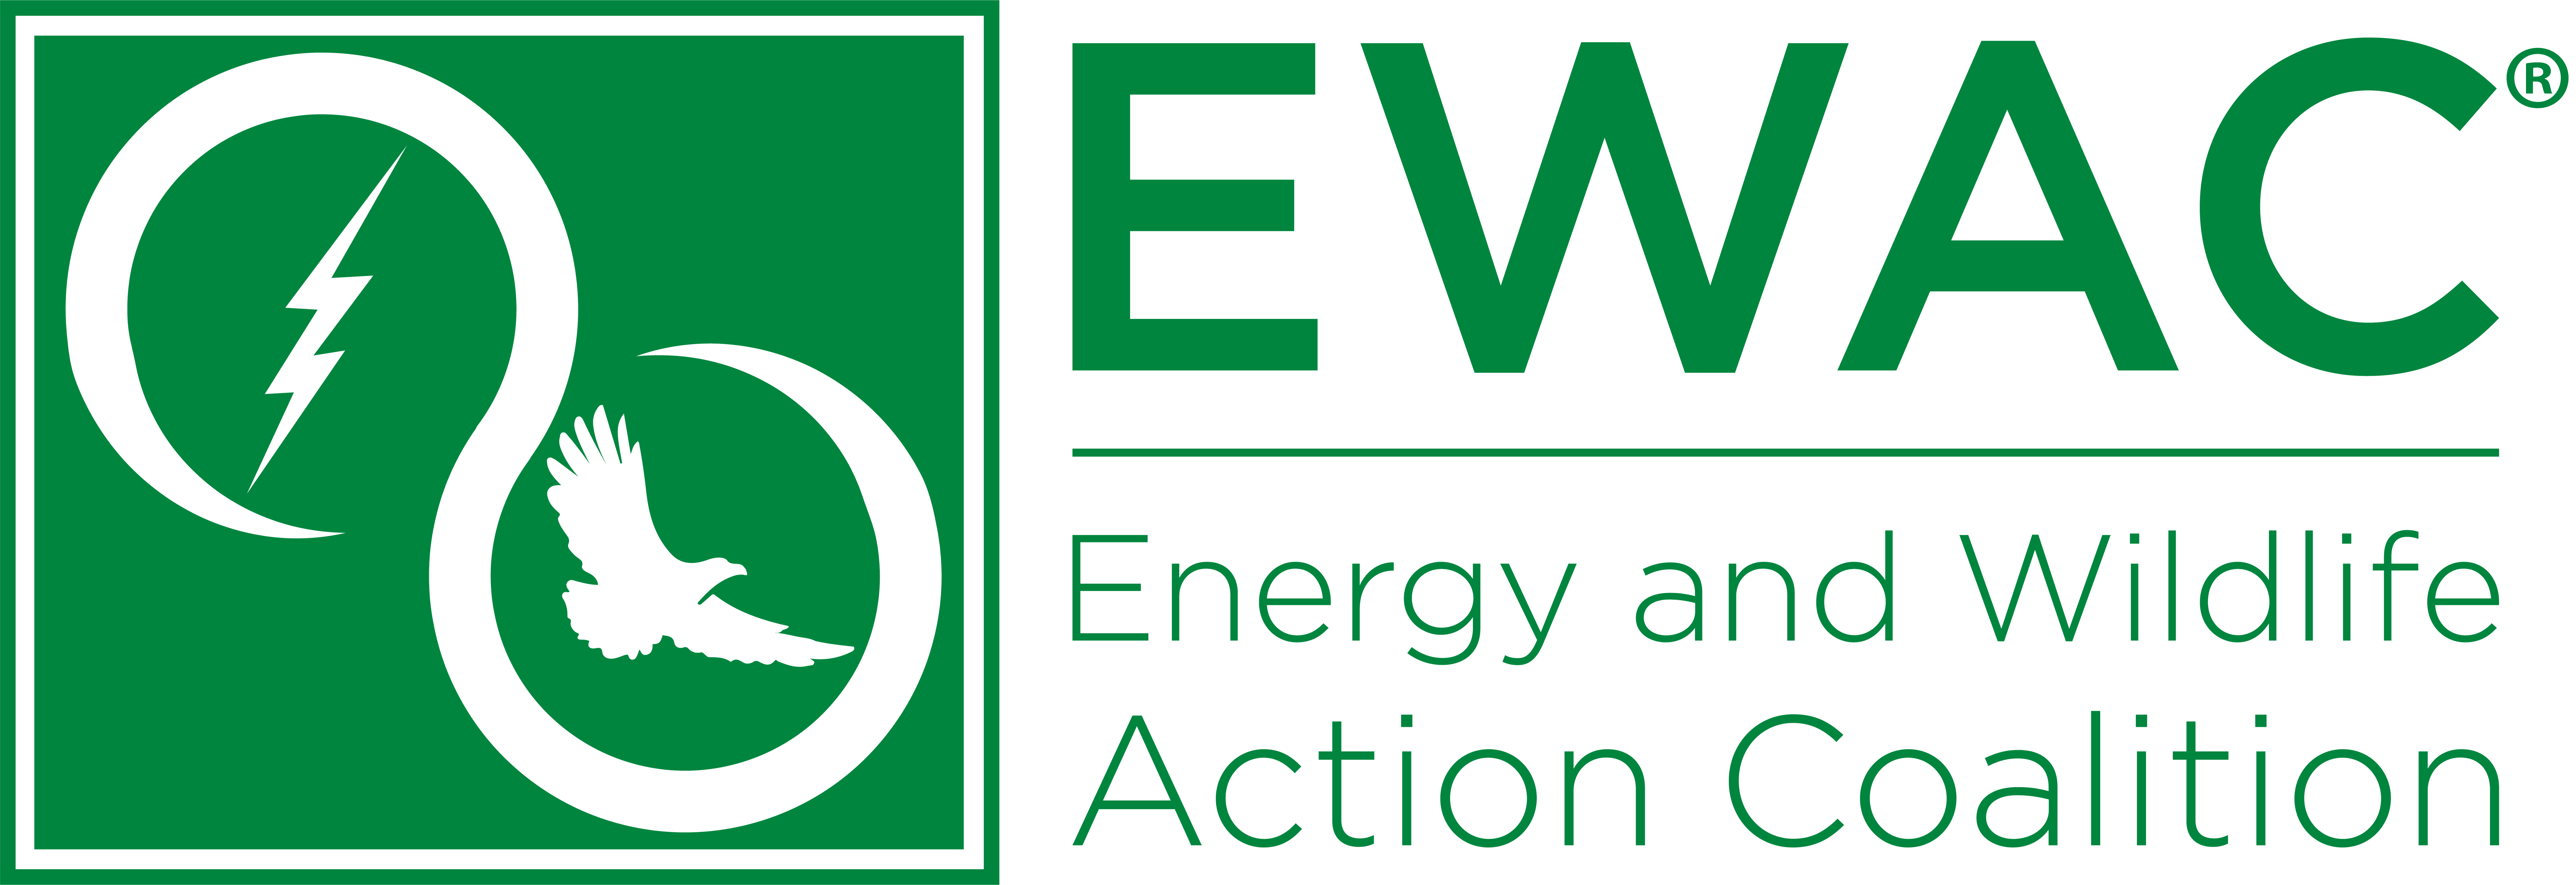 Energy and Wildlife Action Coalition